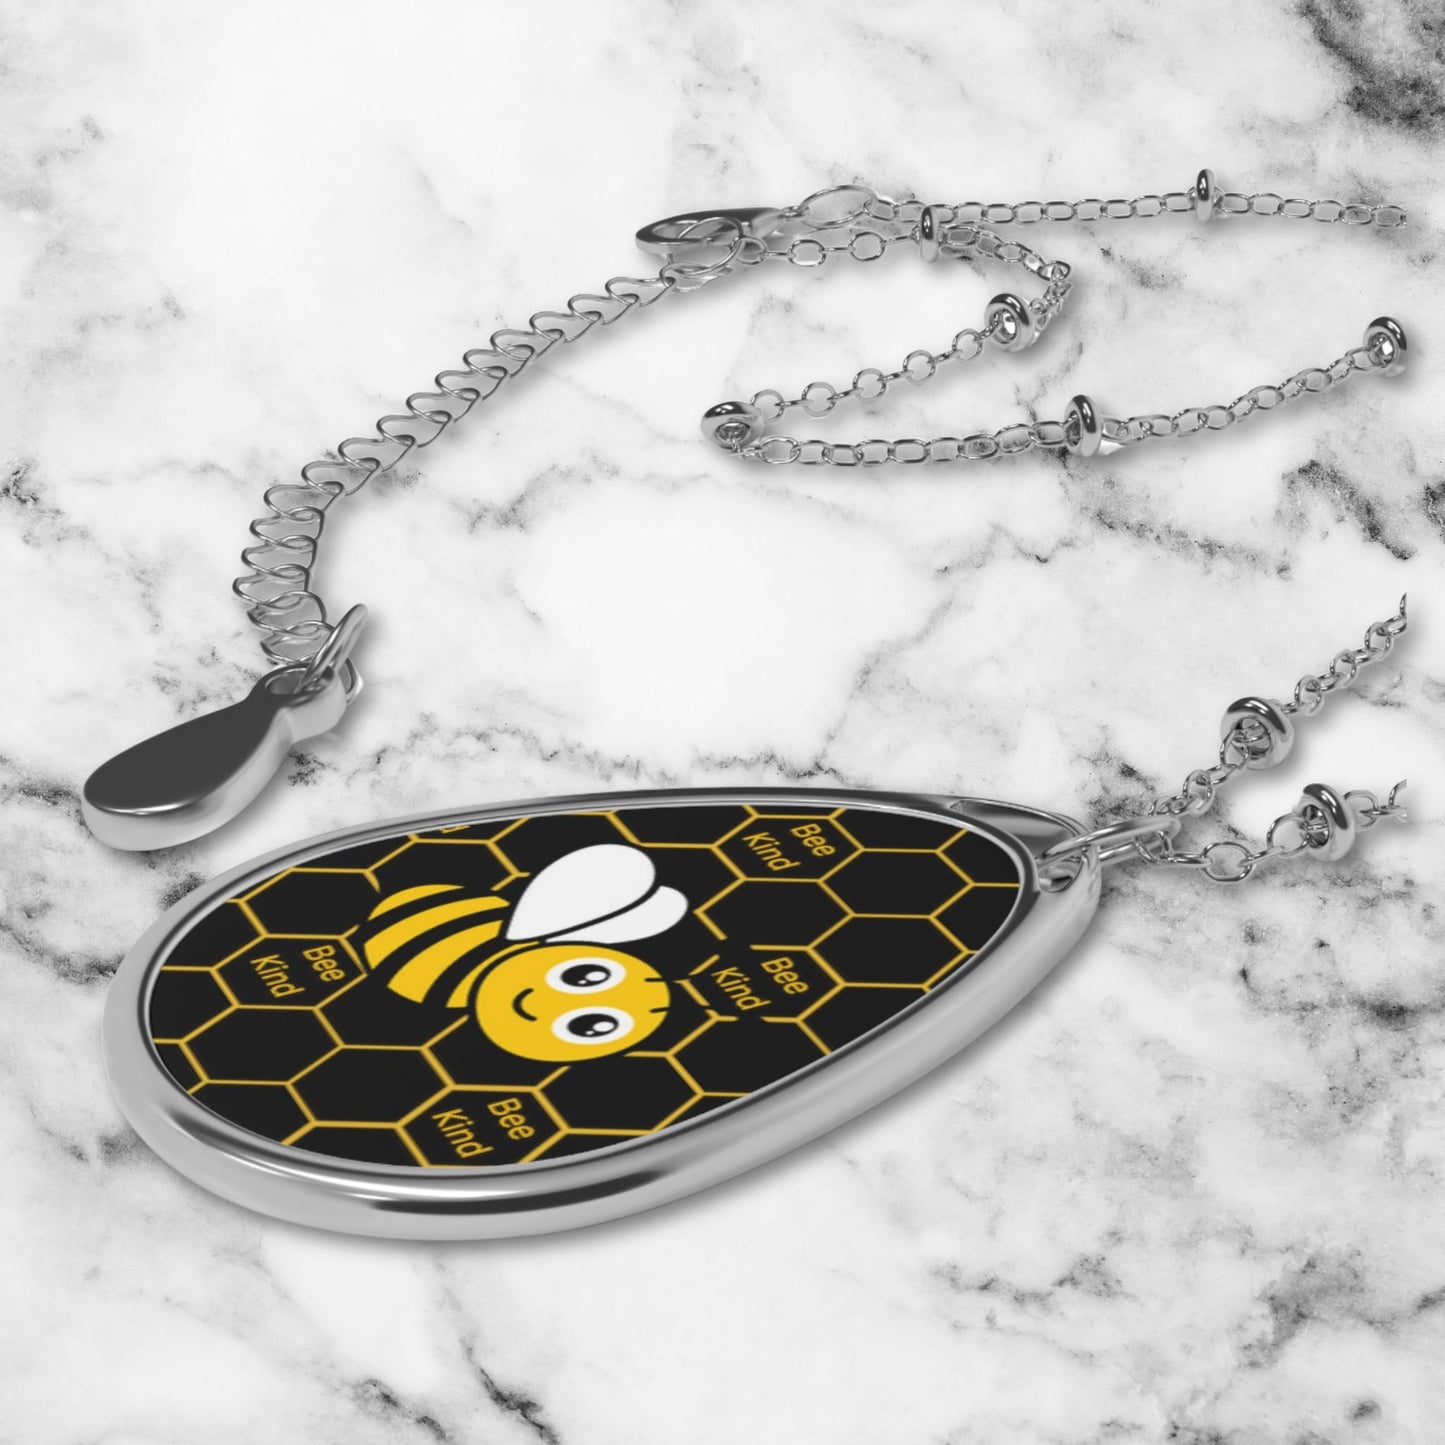 Pendant Bee Kind Necklace Black Cute Bumble Bee Gift For Garden Lover Apiarist Brass Charm Bee Keeper Oval Necklace Honey Comb Silver Chain